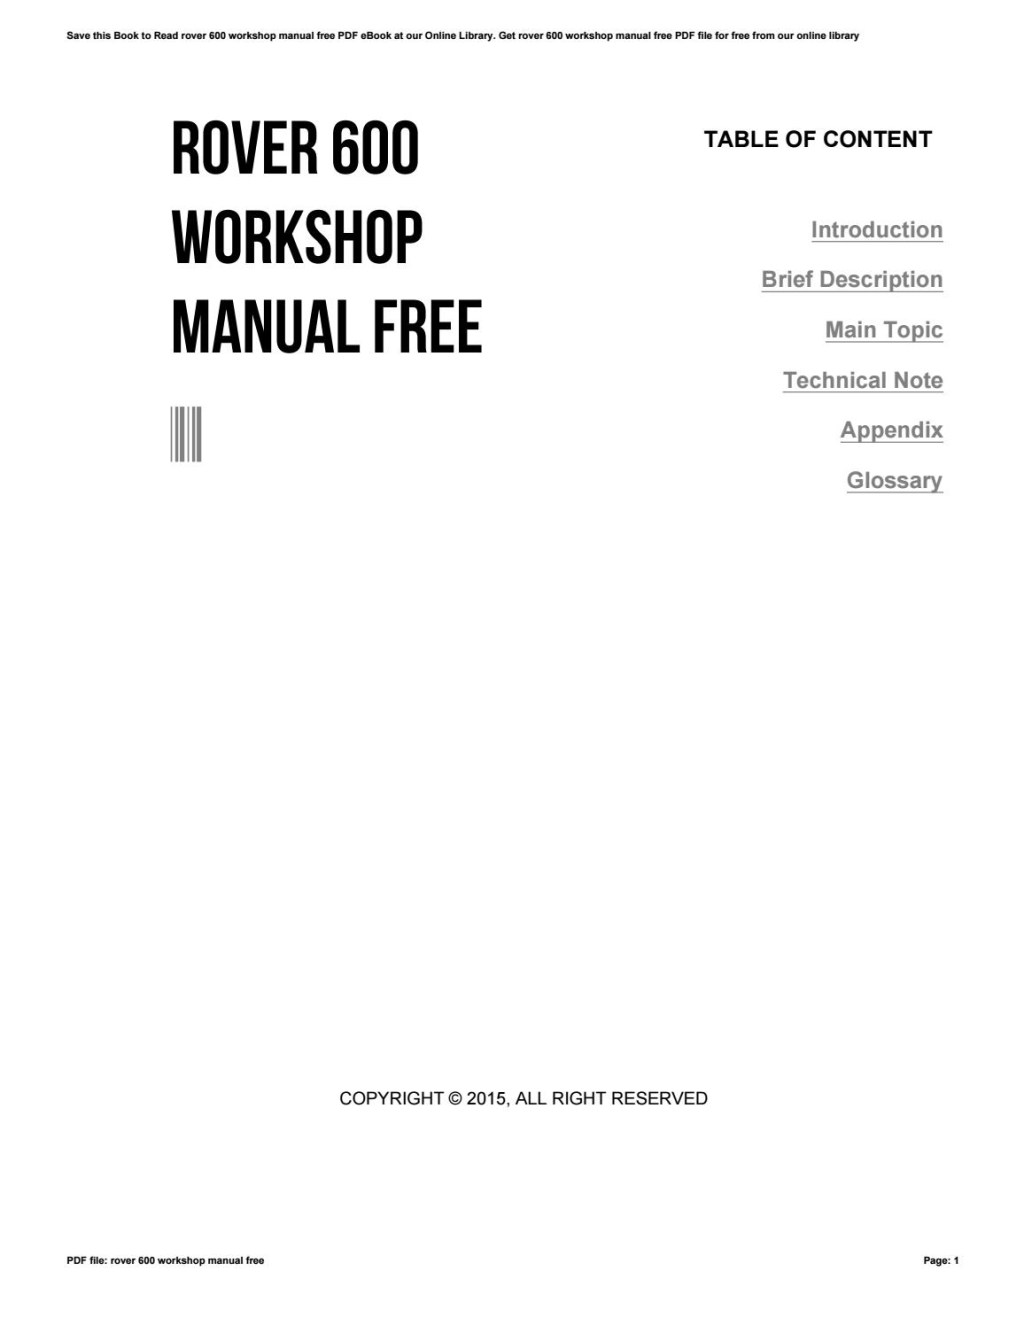 Picture of: Rover  workshop manual free by mail – Issuu